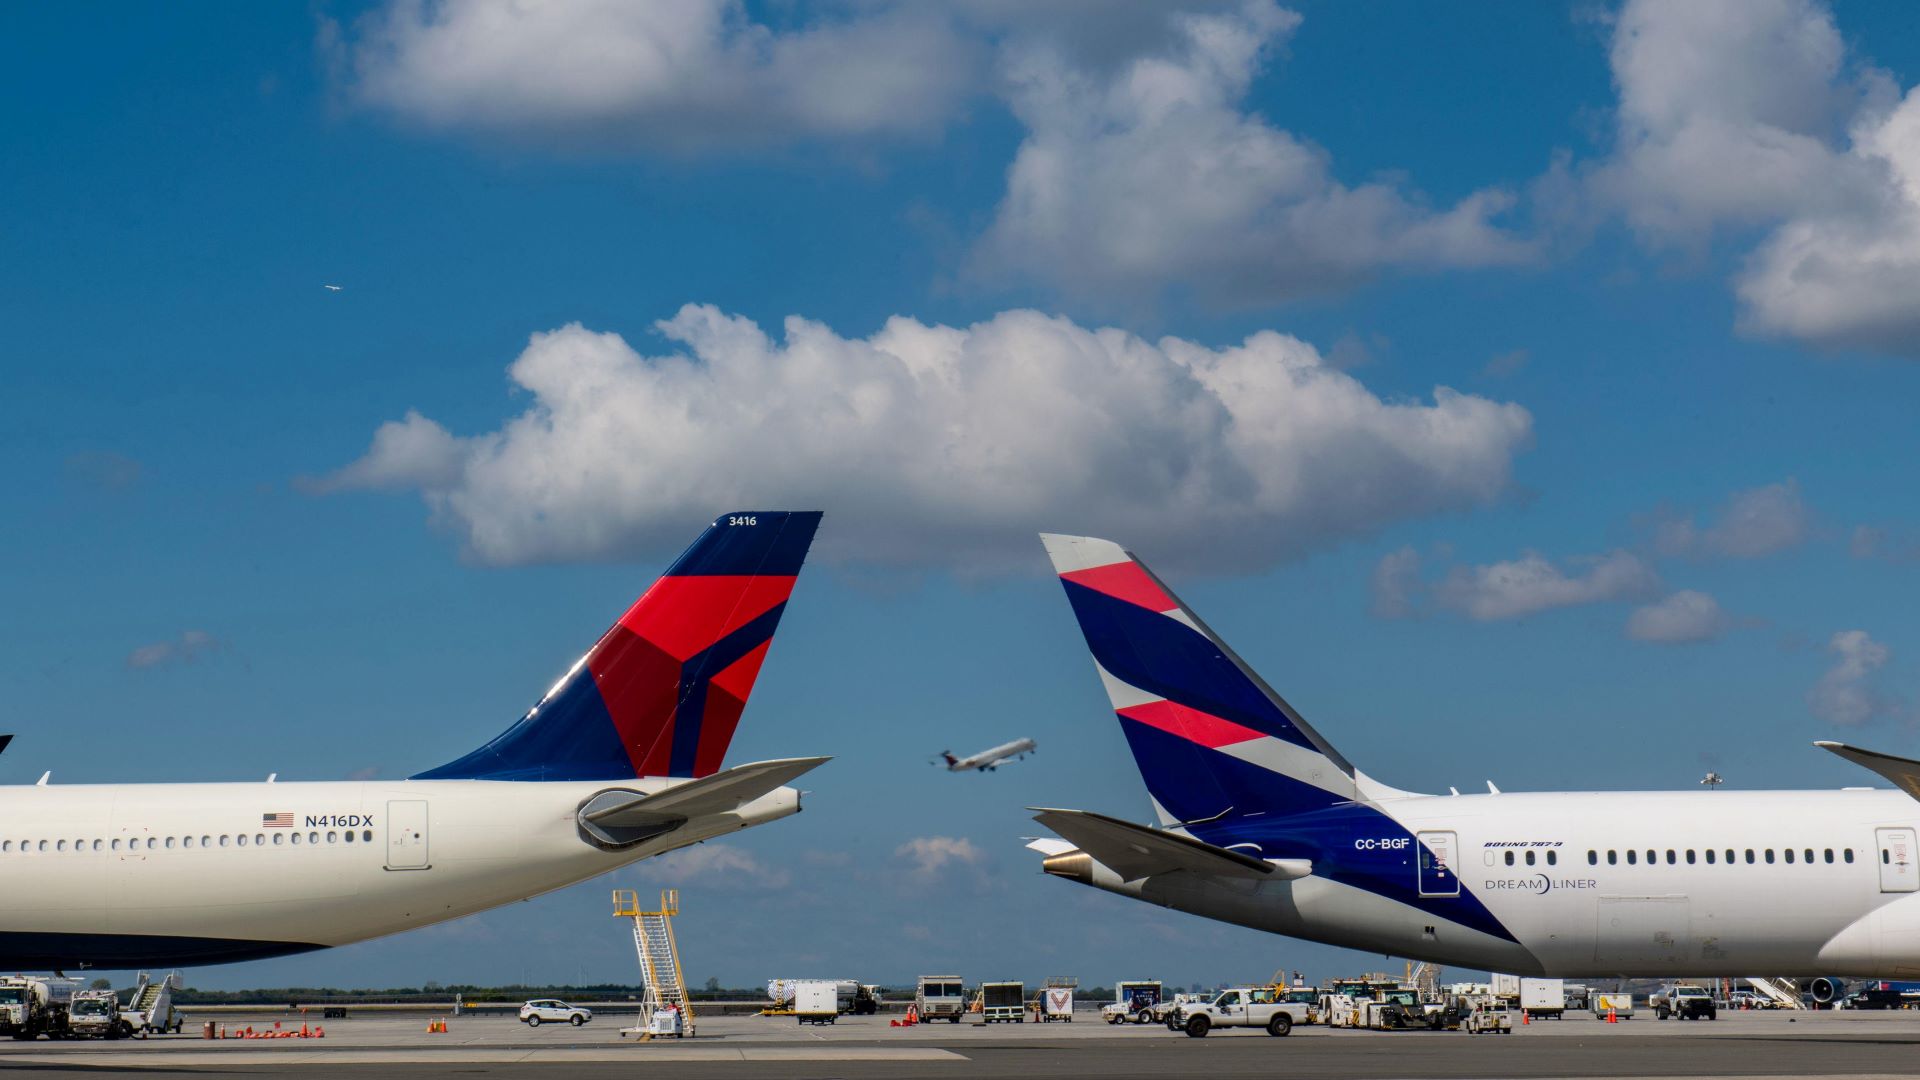 Delta, Latam joint venture to benefit cargo shippers - FreightWaves